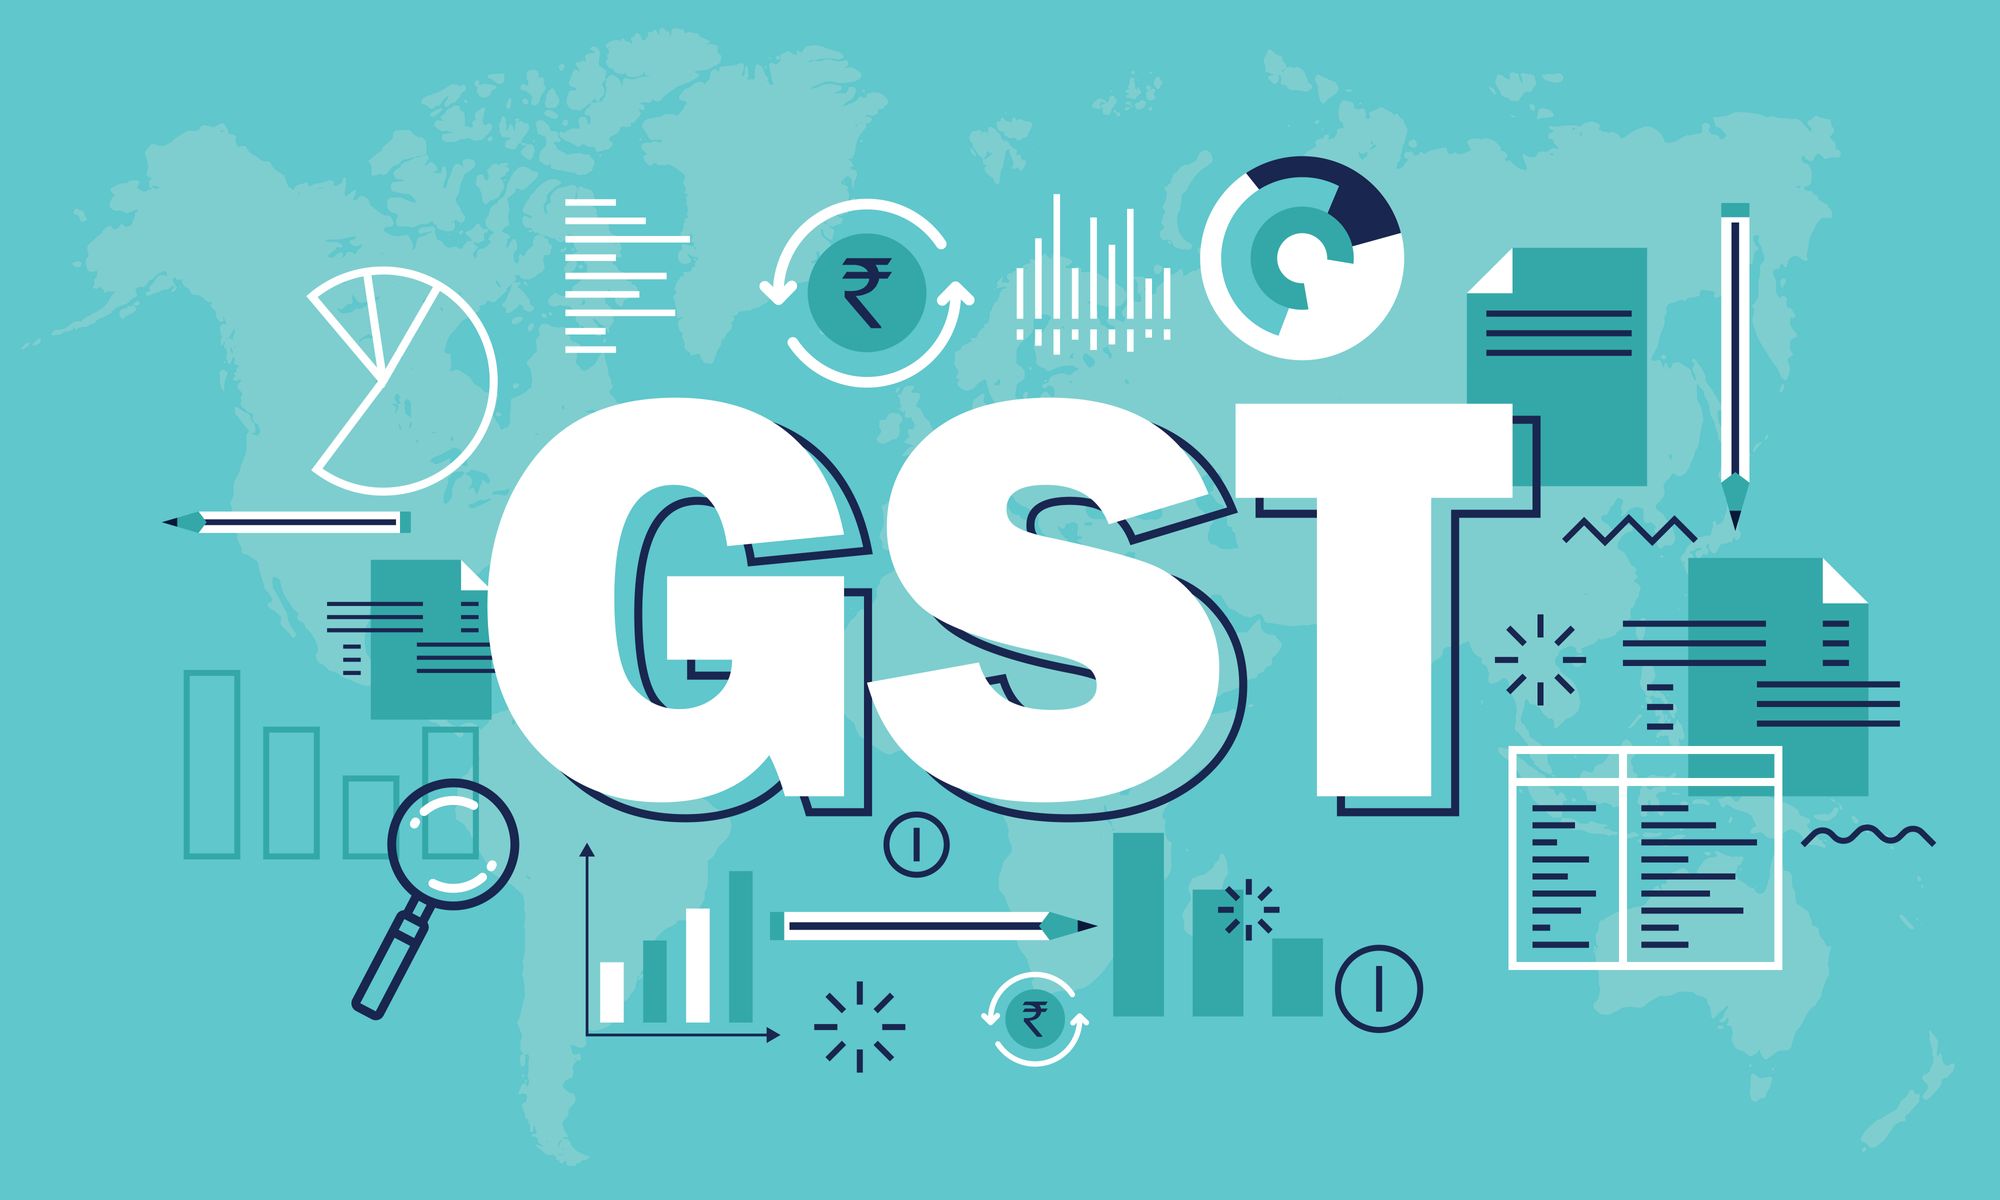 End of GST aid makes states wary: States’ capex growth much slower than budgeted